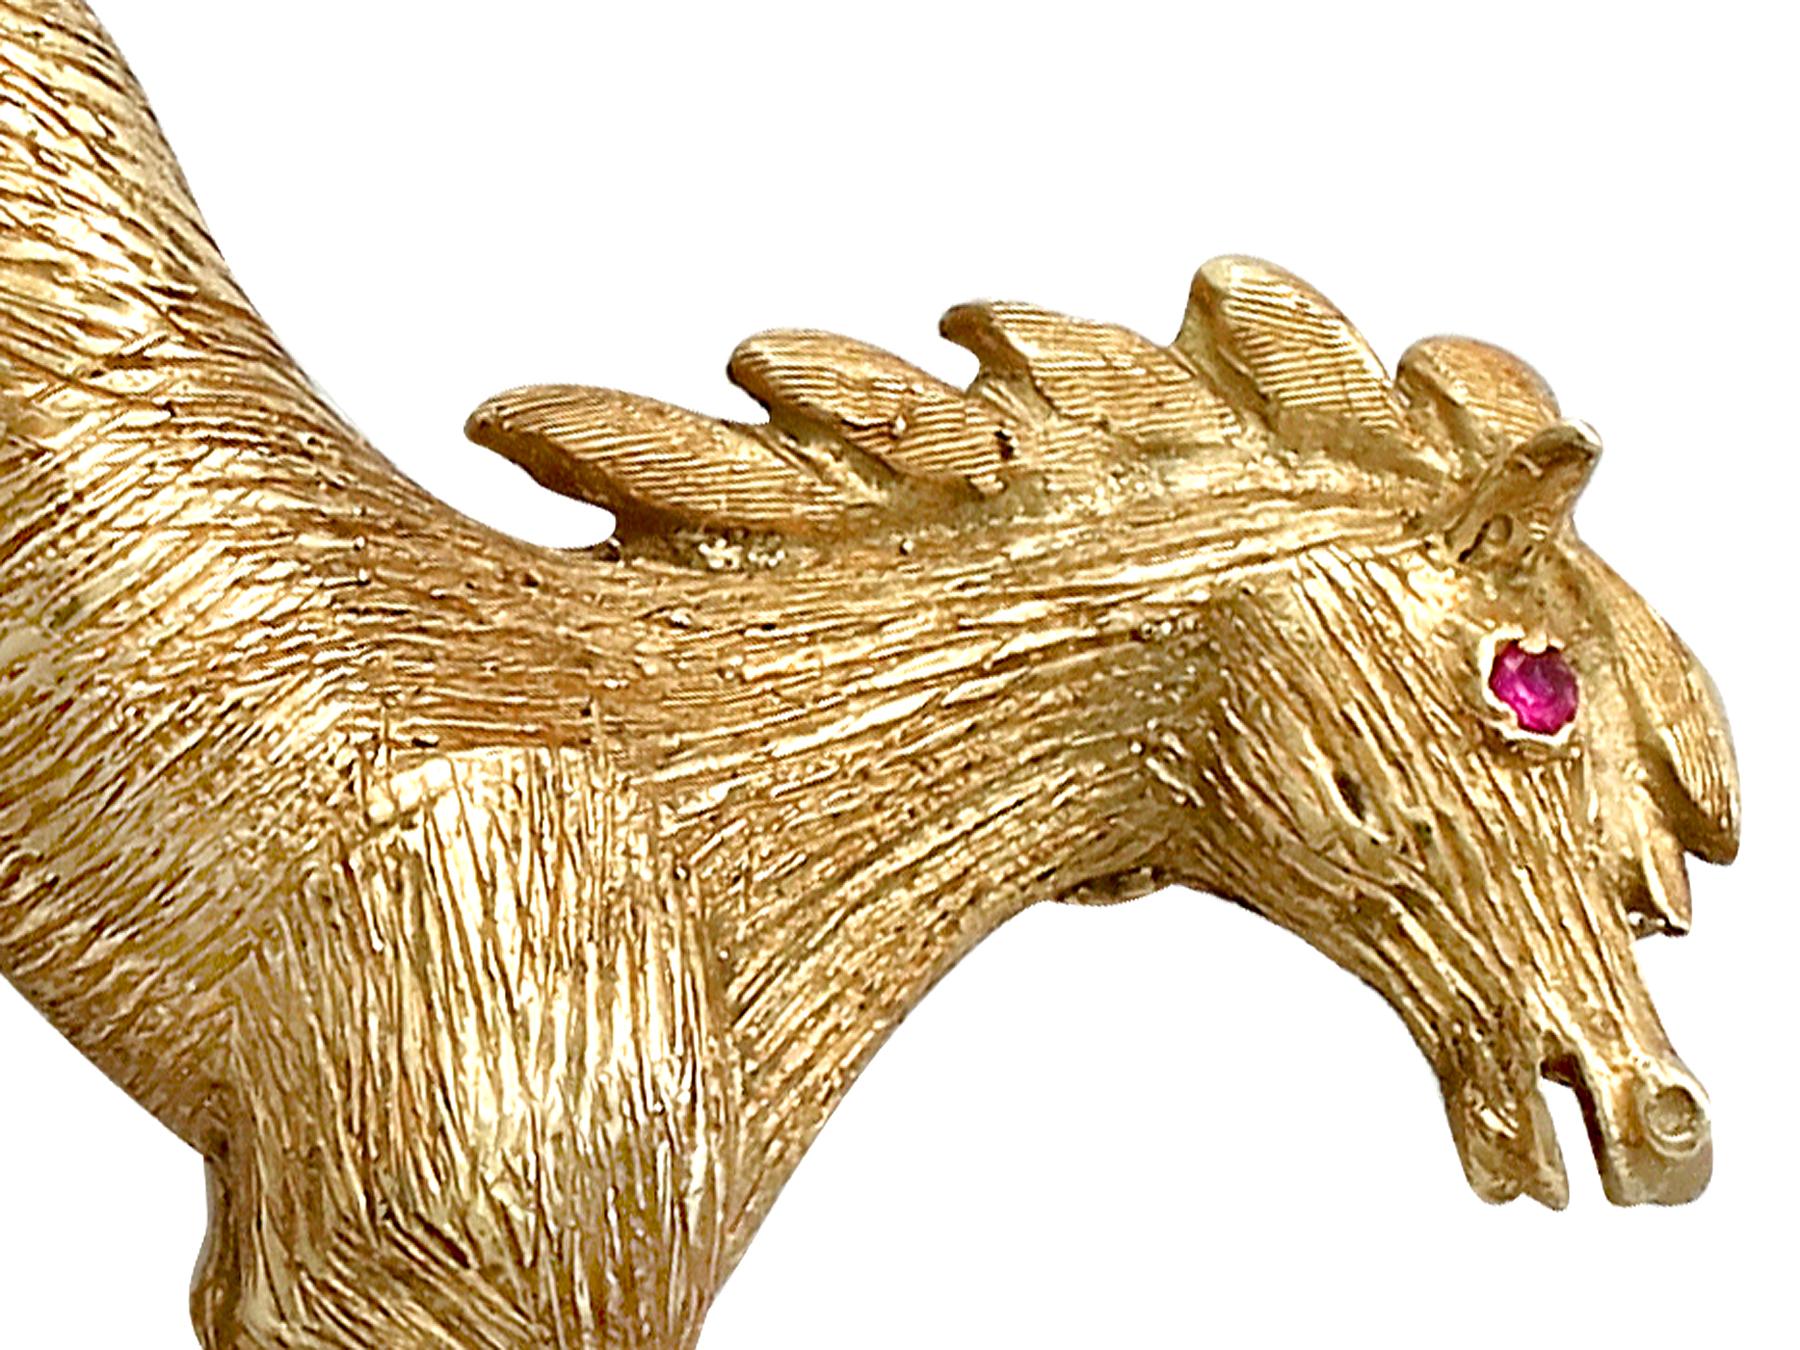 An exceptional, fine and impressive vintage 0.02 carat natural ruby and 18 karat yellow gold brooch modelled in the form of a galloping horse; part of our vintage jewelry and estate jewelry collections

This exceptional, fine and impressive vintage